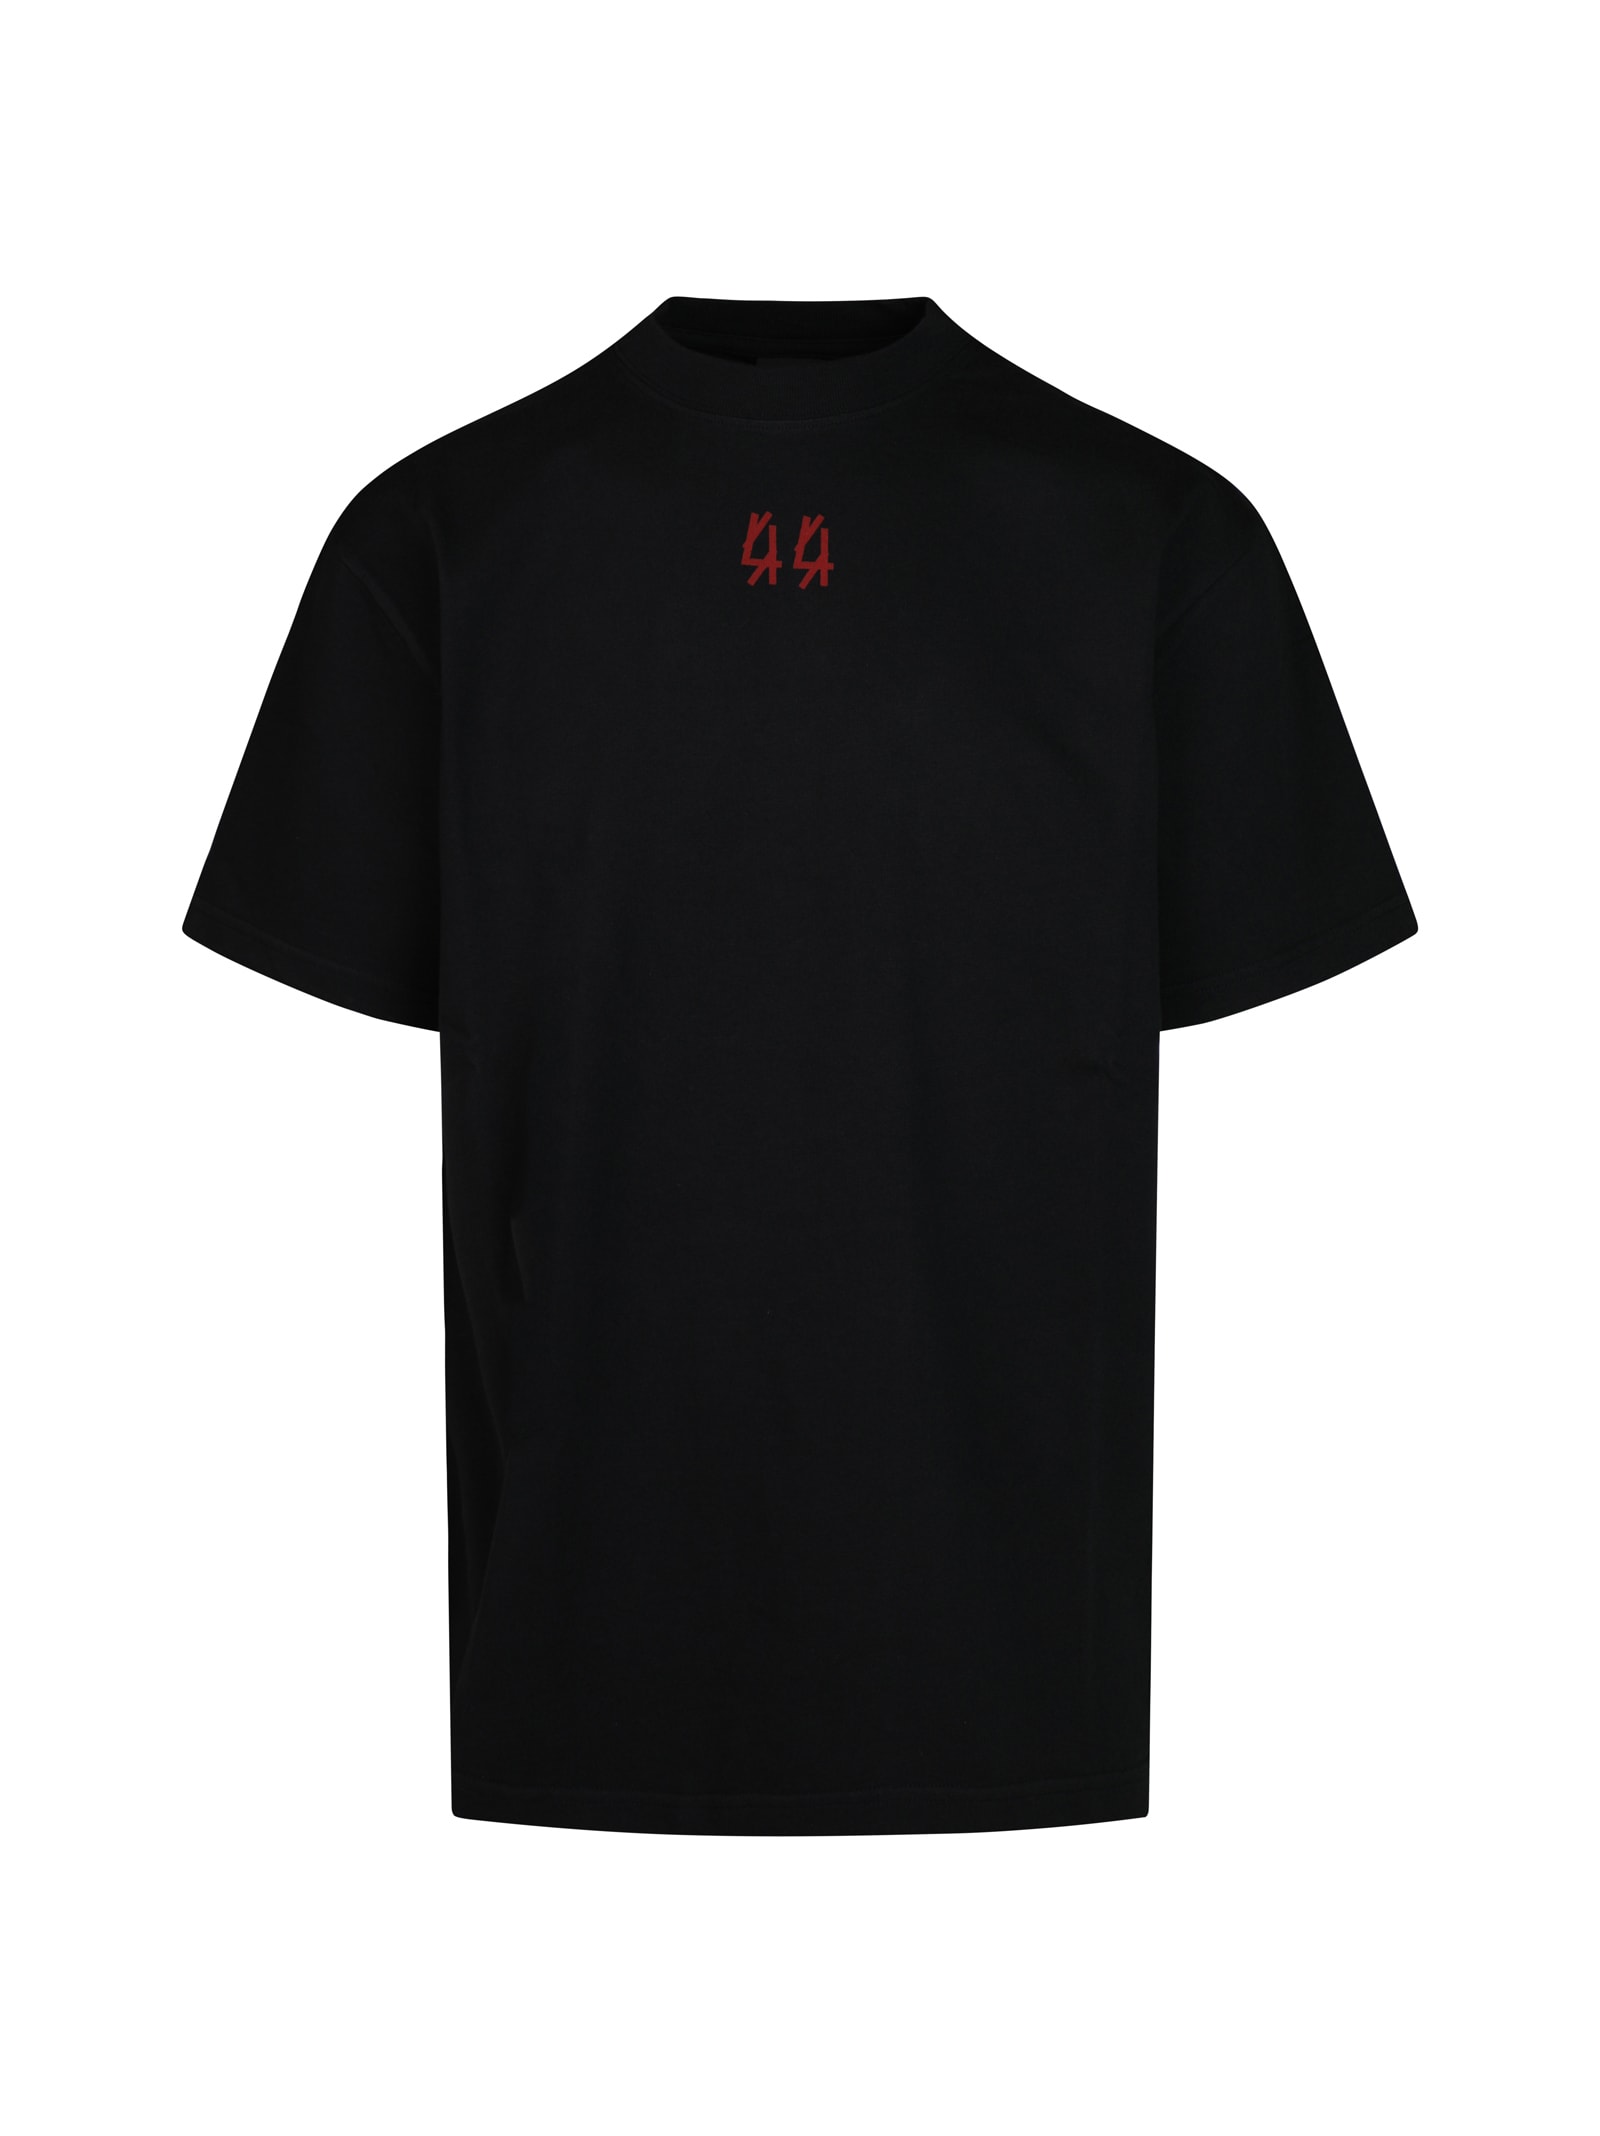 44 Label Group Growth Oversized T-shirt